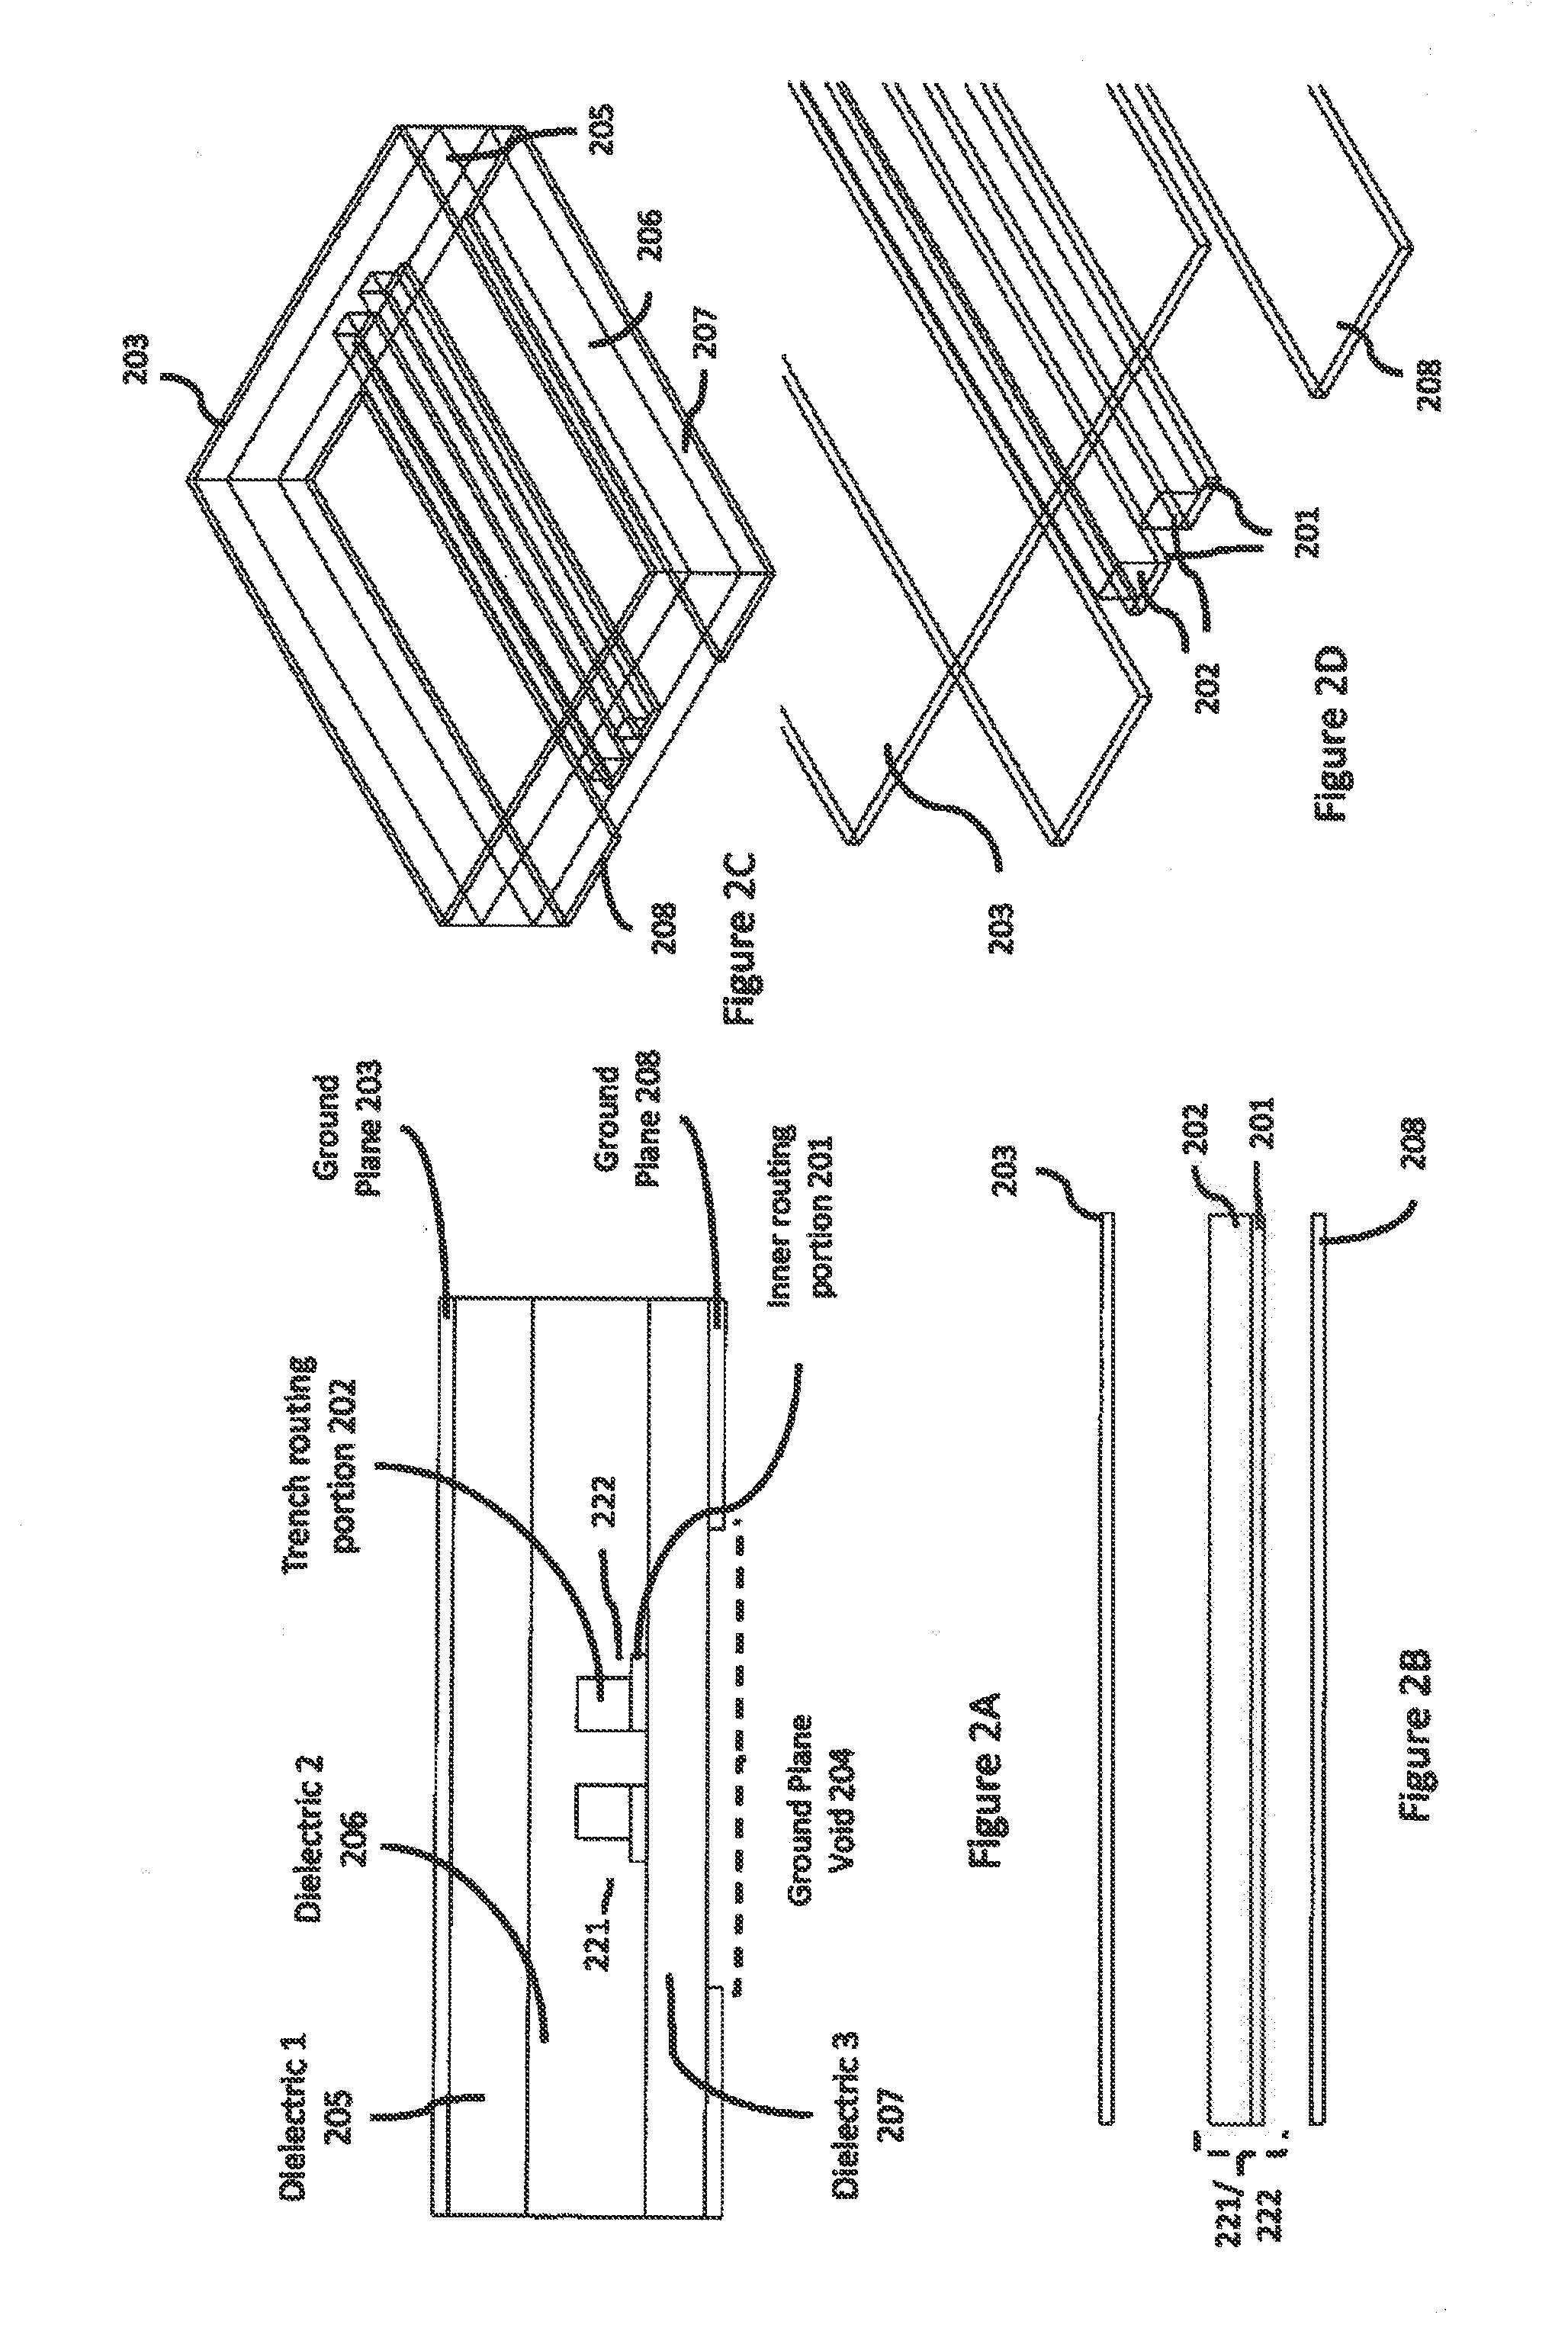 Vertical trench routing in a substrate